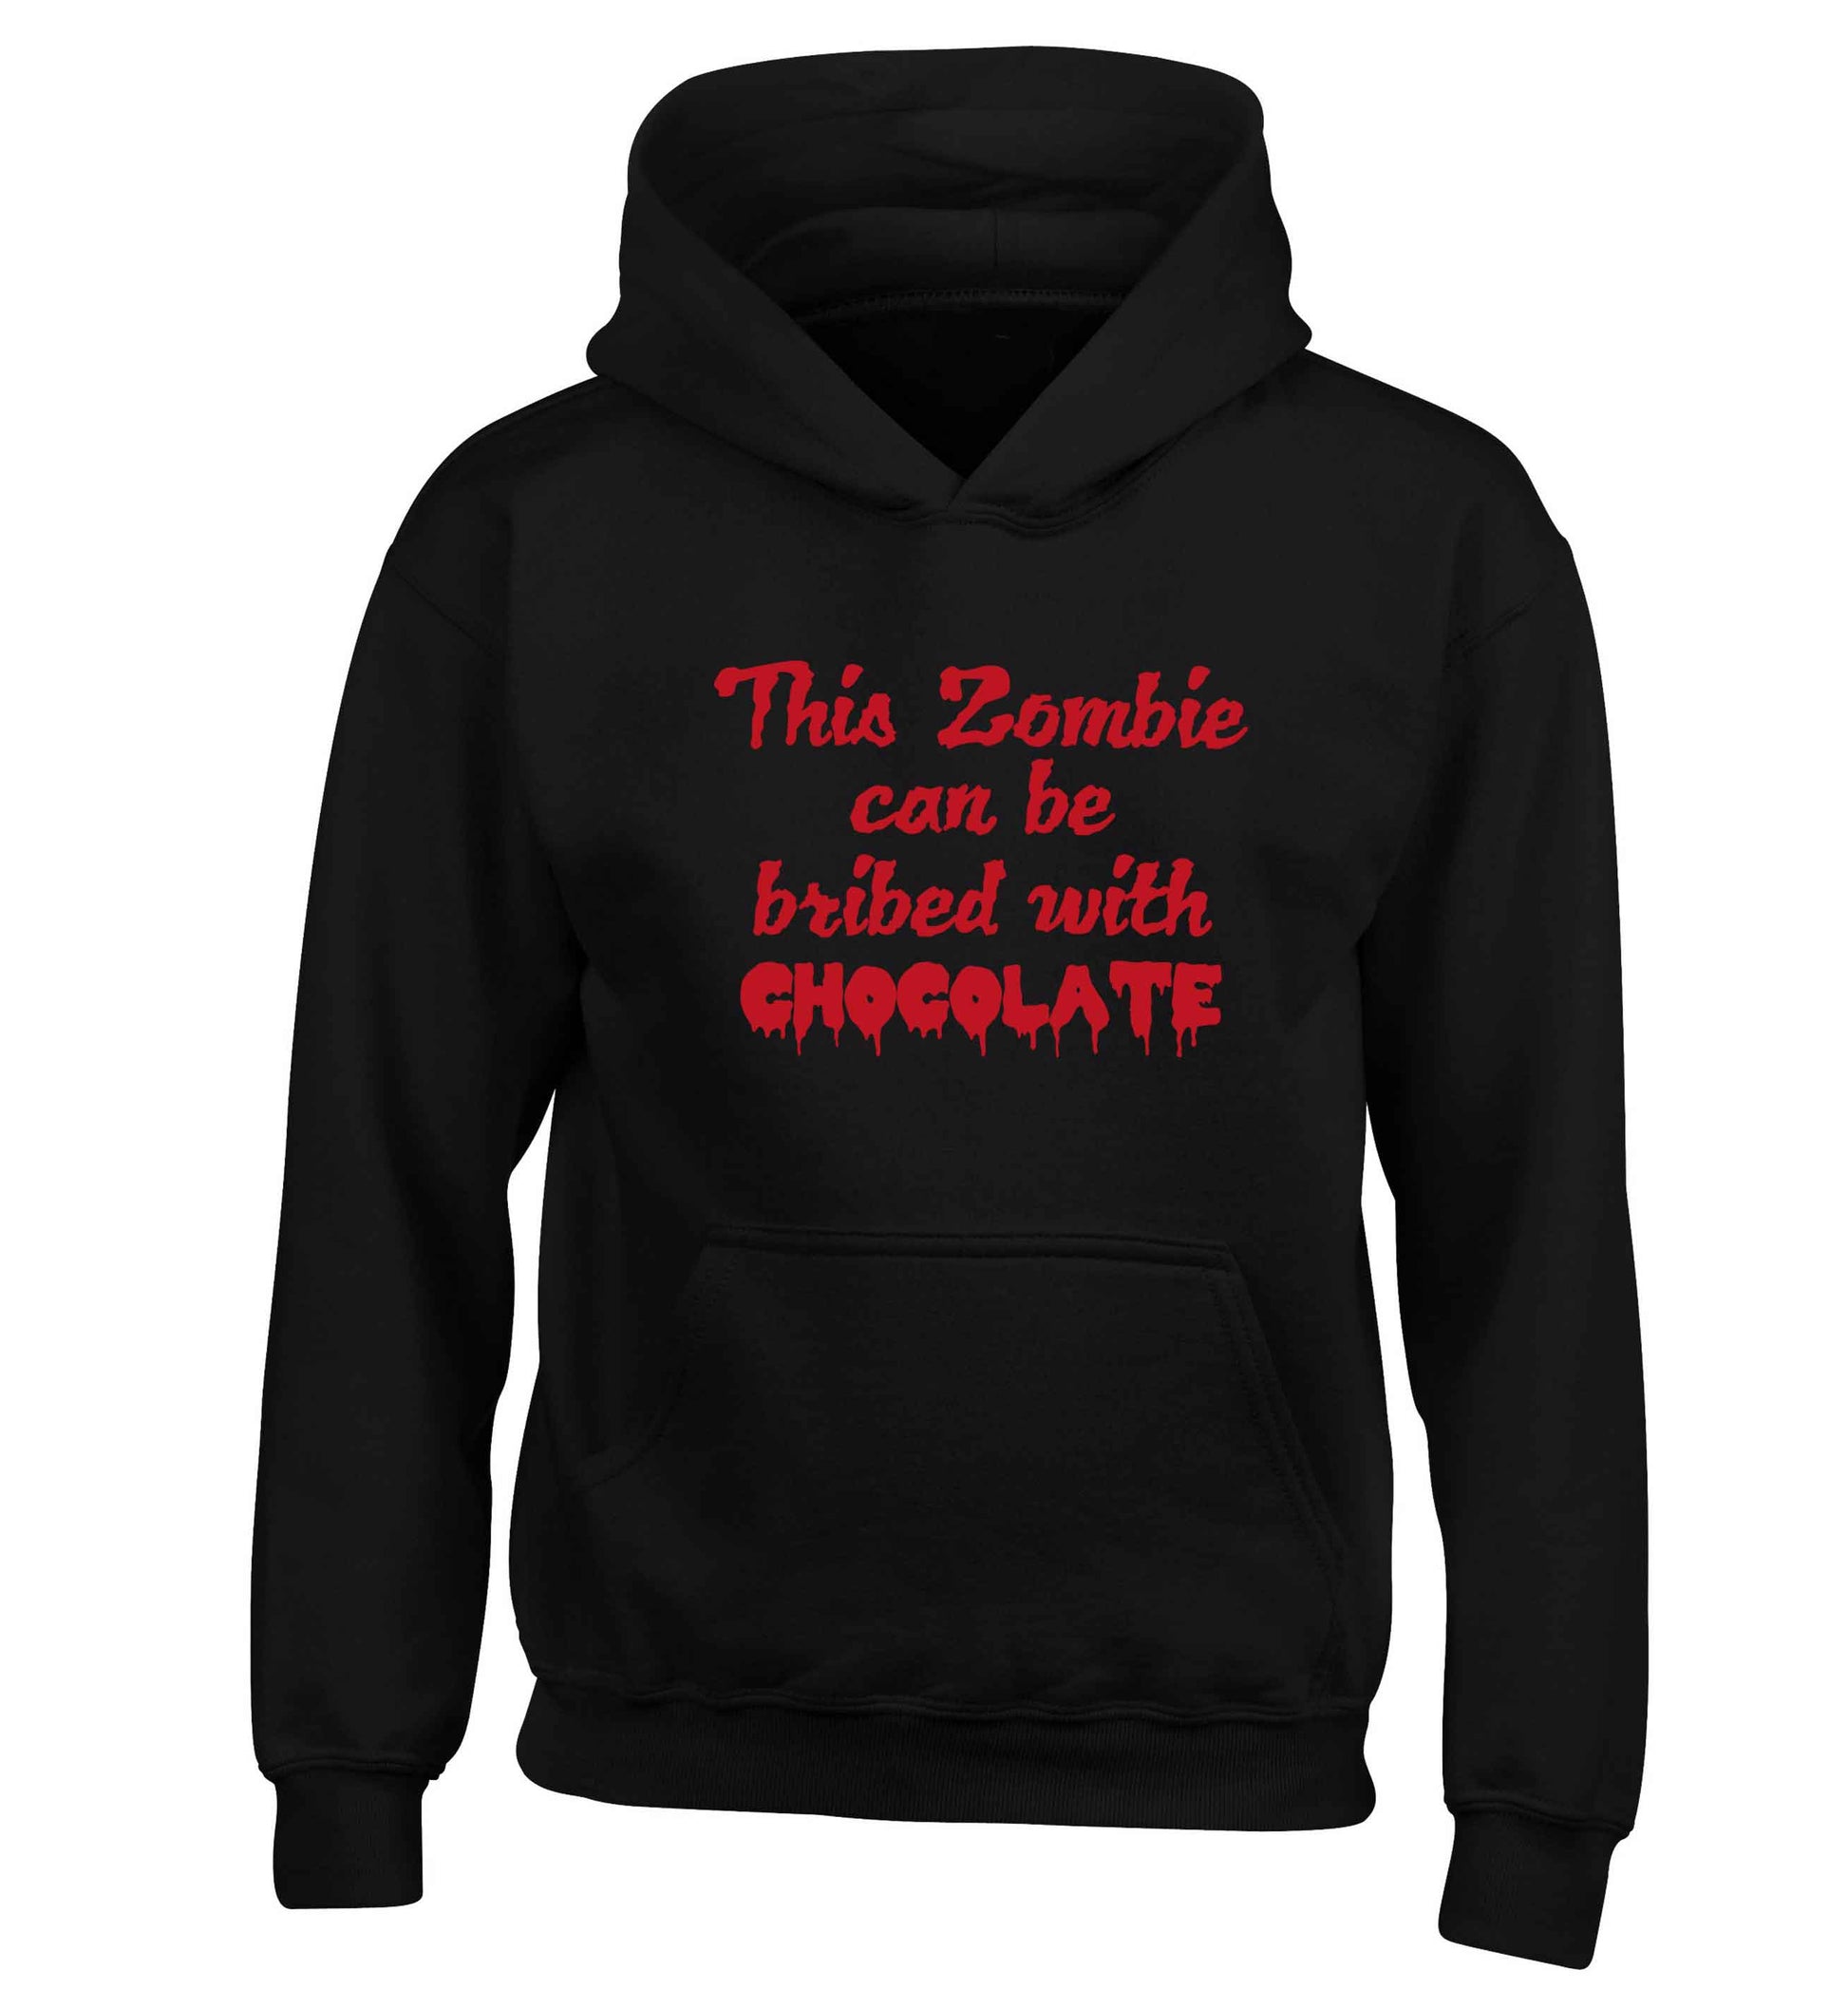 This zombie can be bribed with chocolate children's black hoodie 12-13 Years